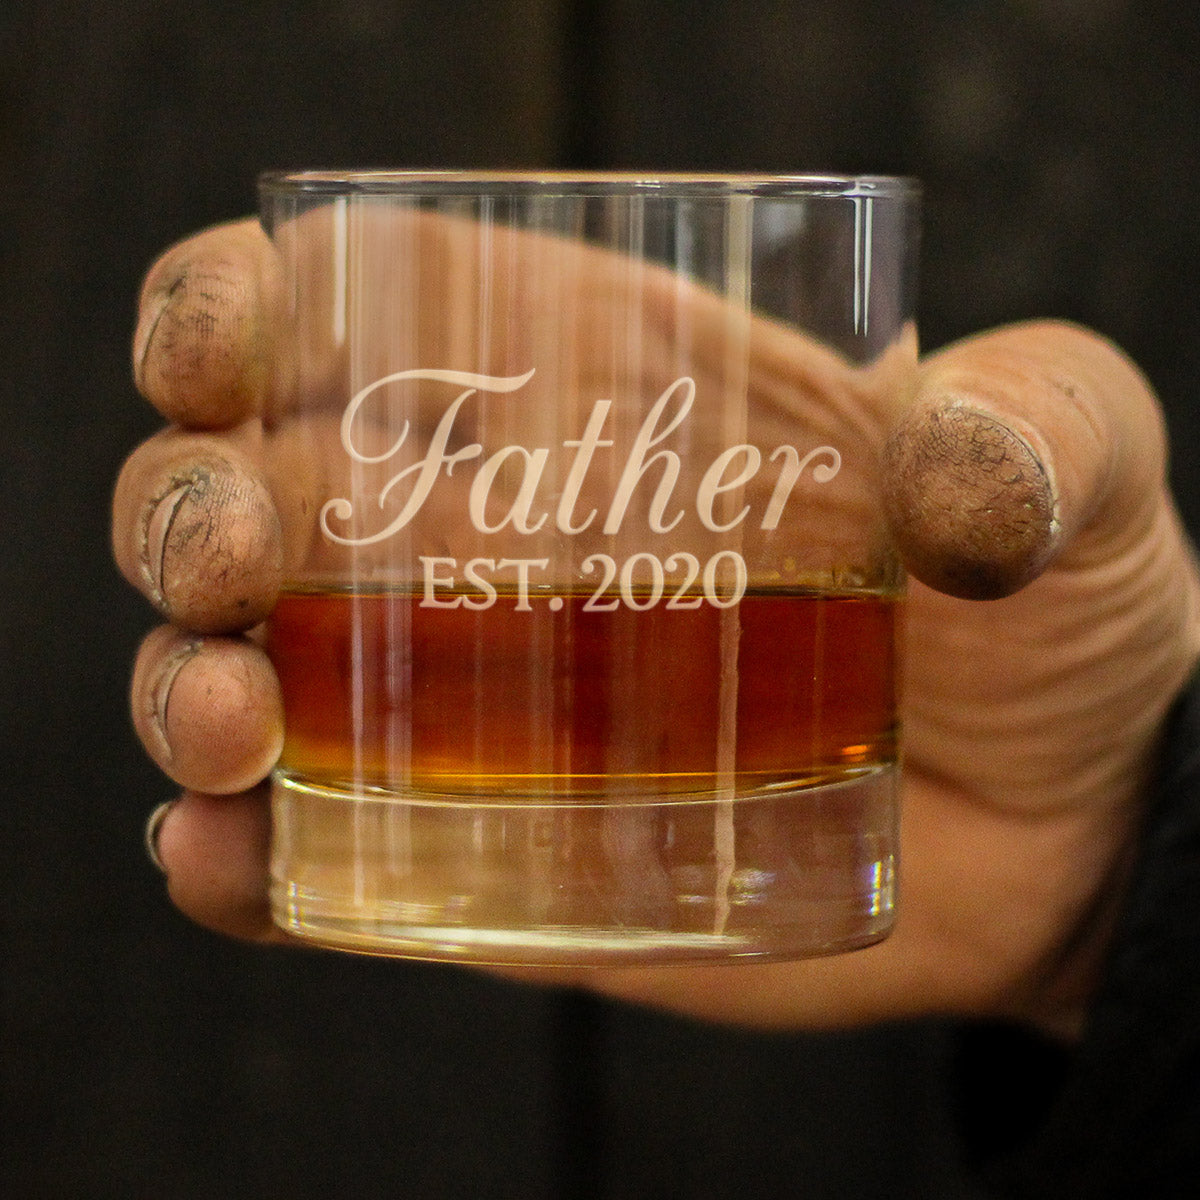 Father Est 2020 - New Dad Whiskey Rocks Glass Gift for First Time Daddy - Decorative Engraved Whisky Drinking Glasses